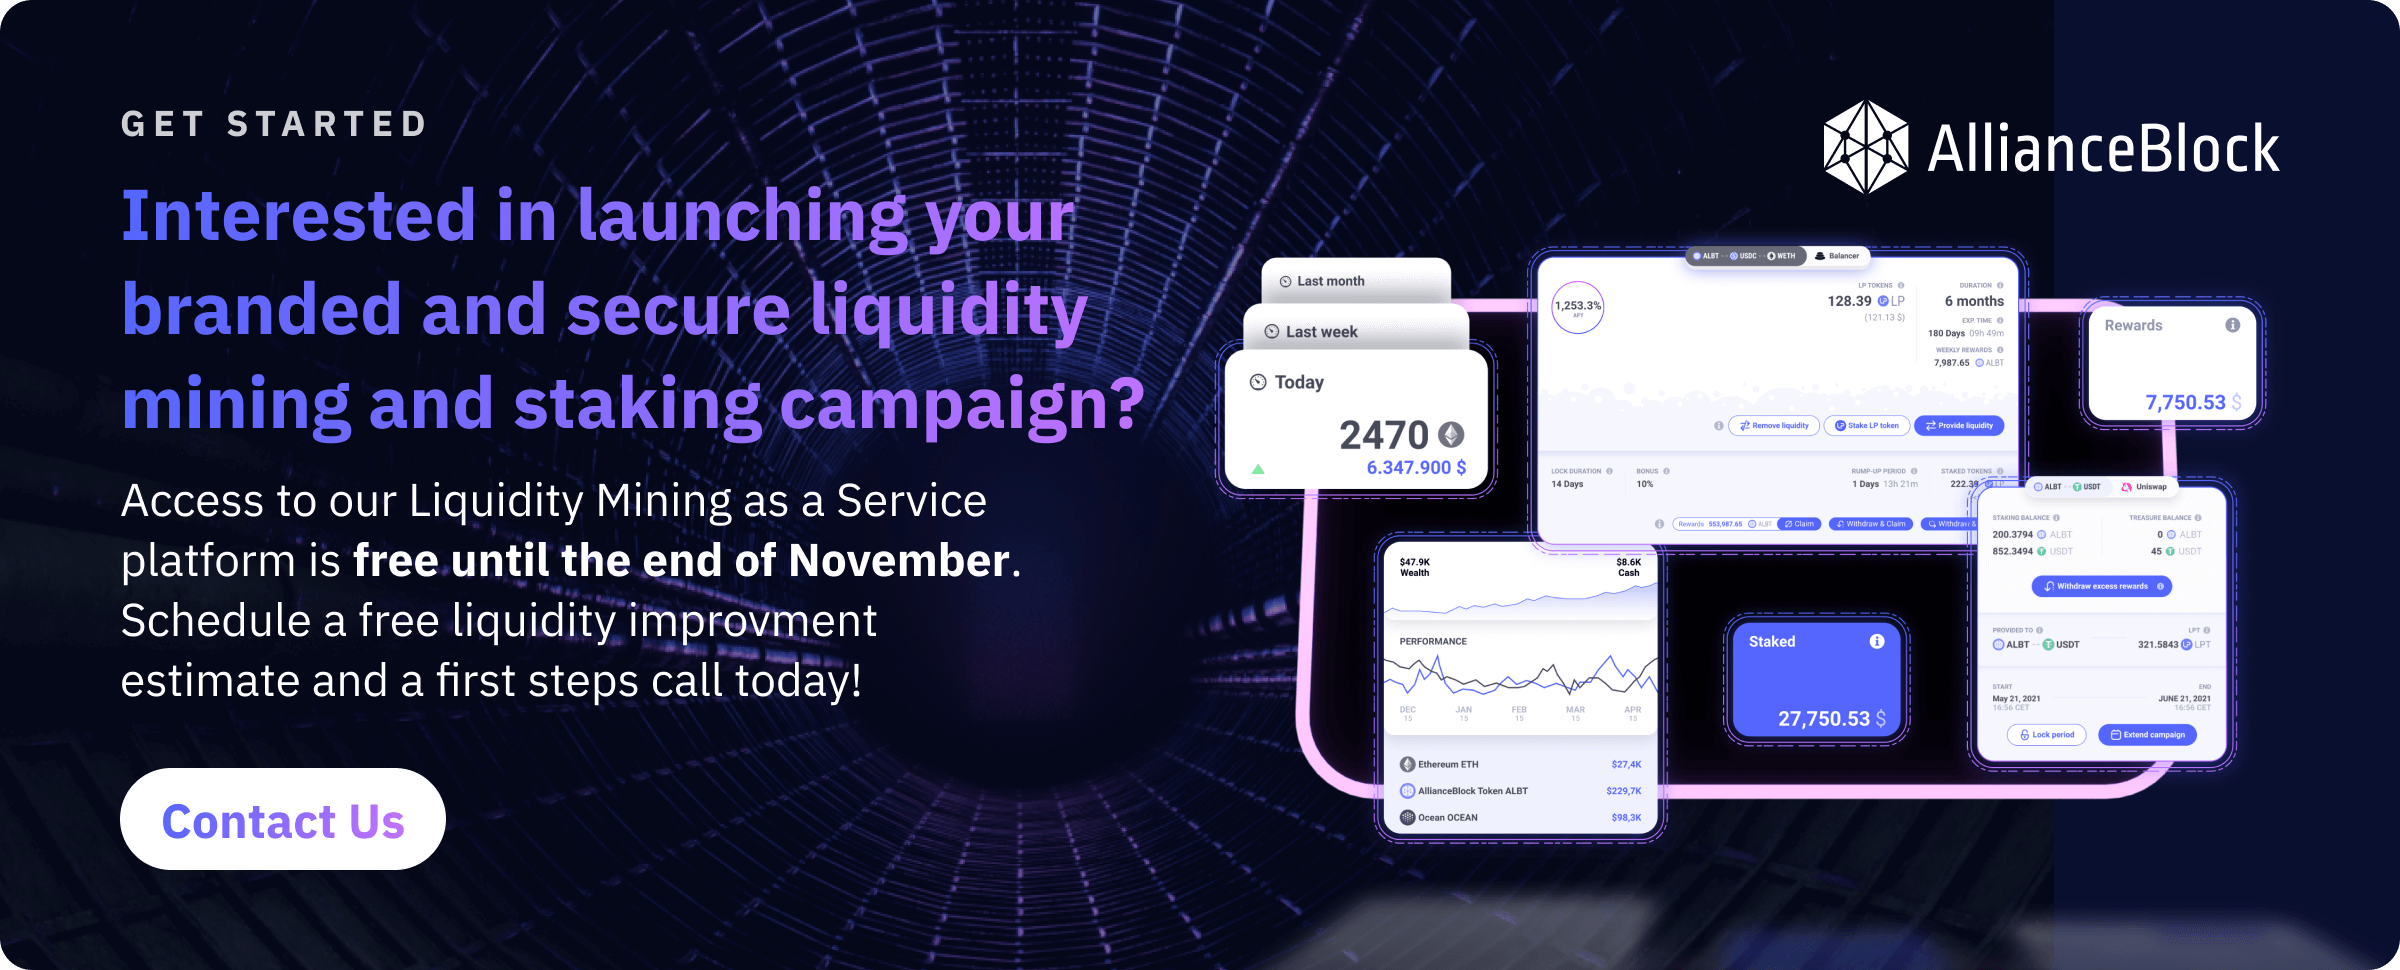 Get started with your own liquidity mining and staking campaigns